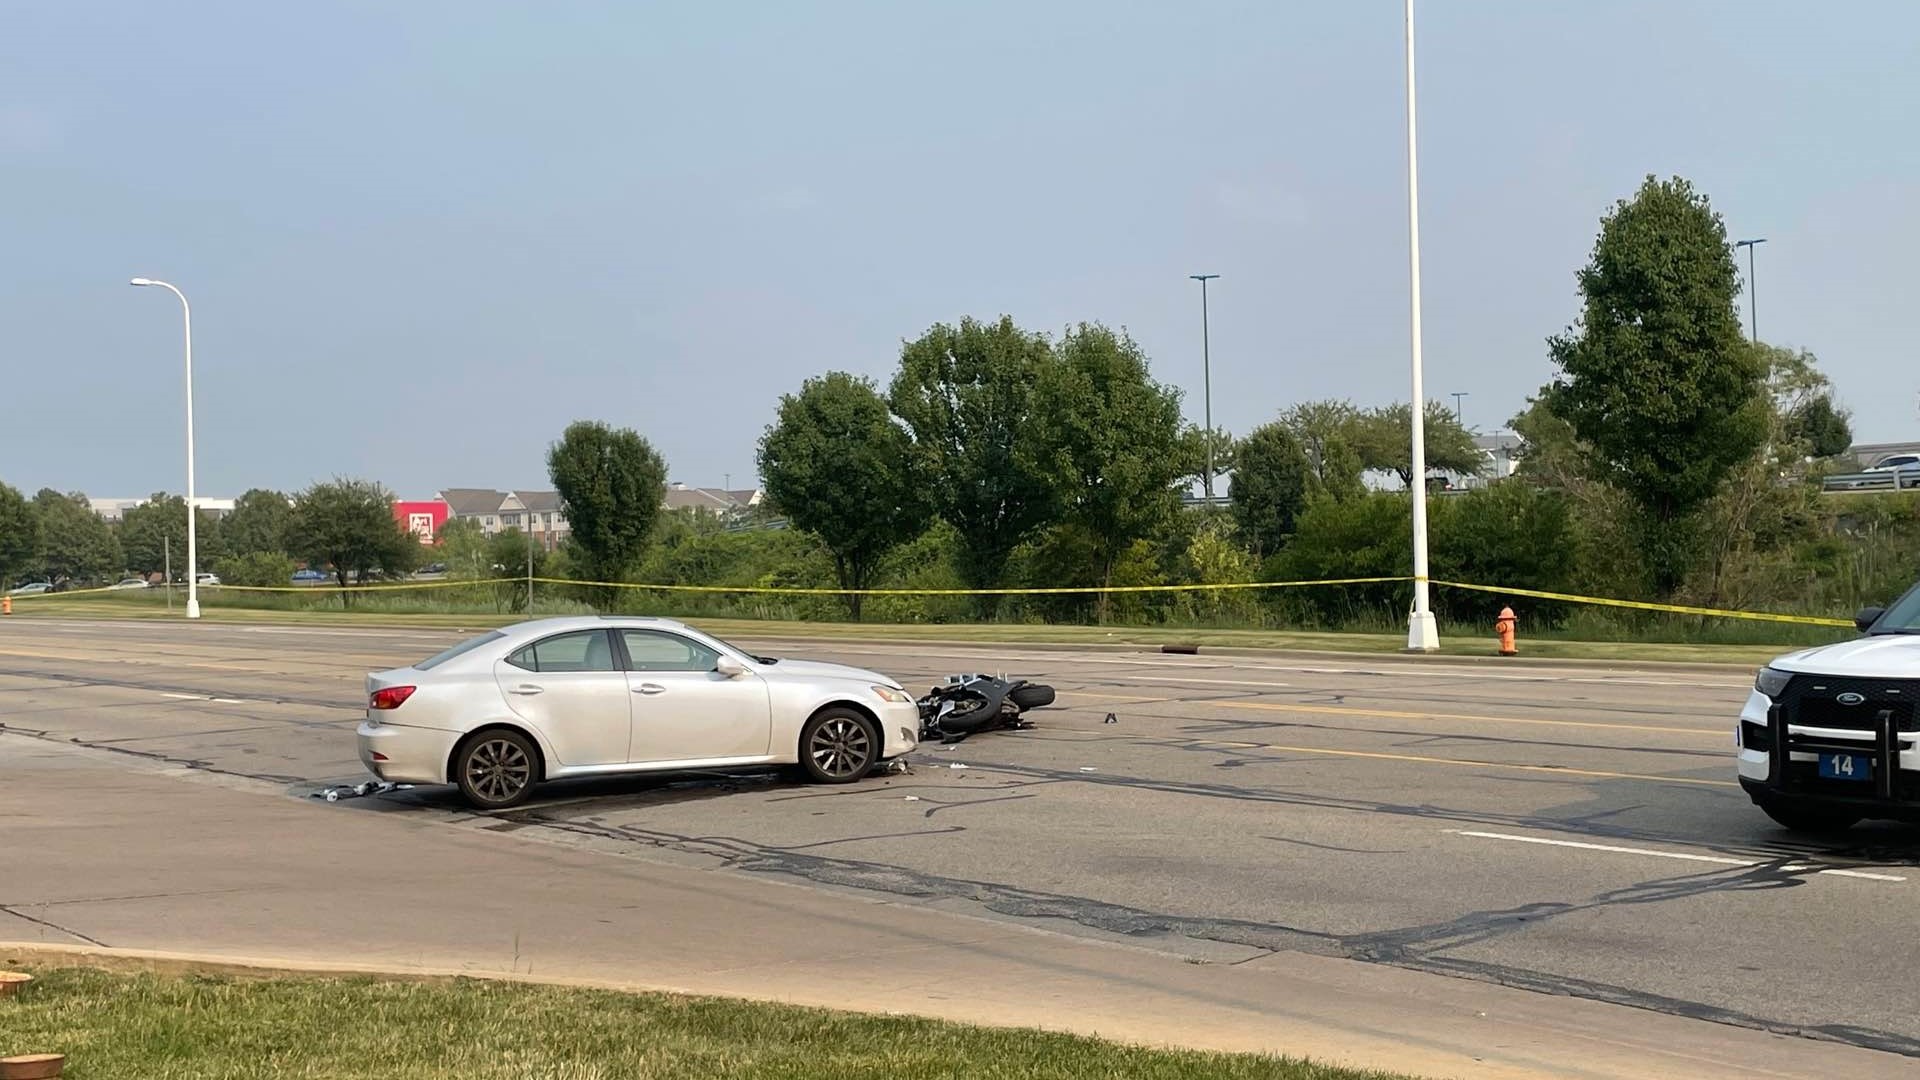 A motorcyclist was killed in a crash near Polaris Sunday afternoon, according to the Columbus Division of Police.